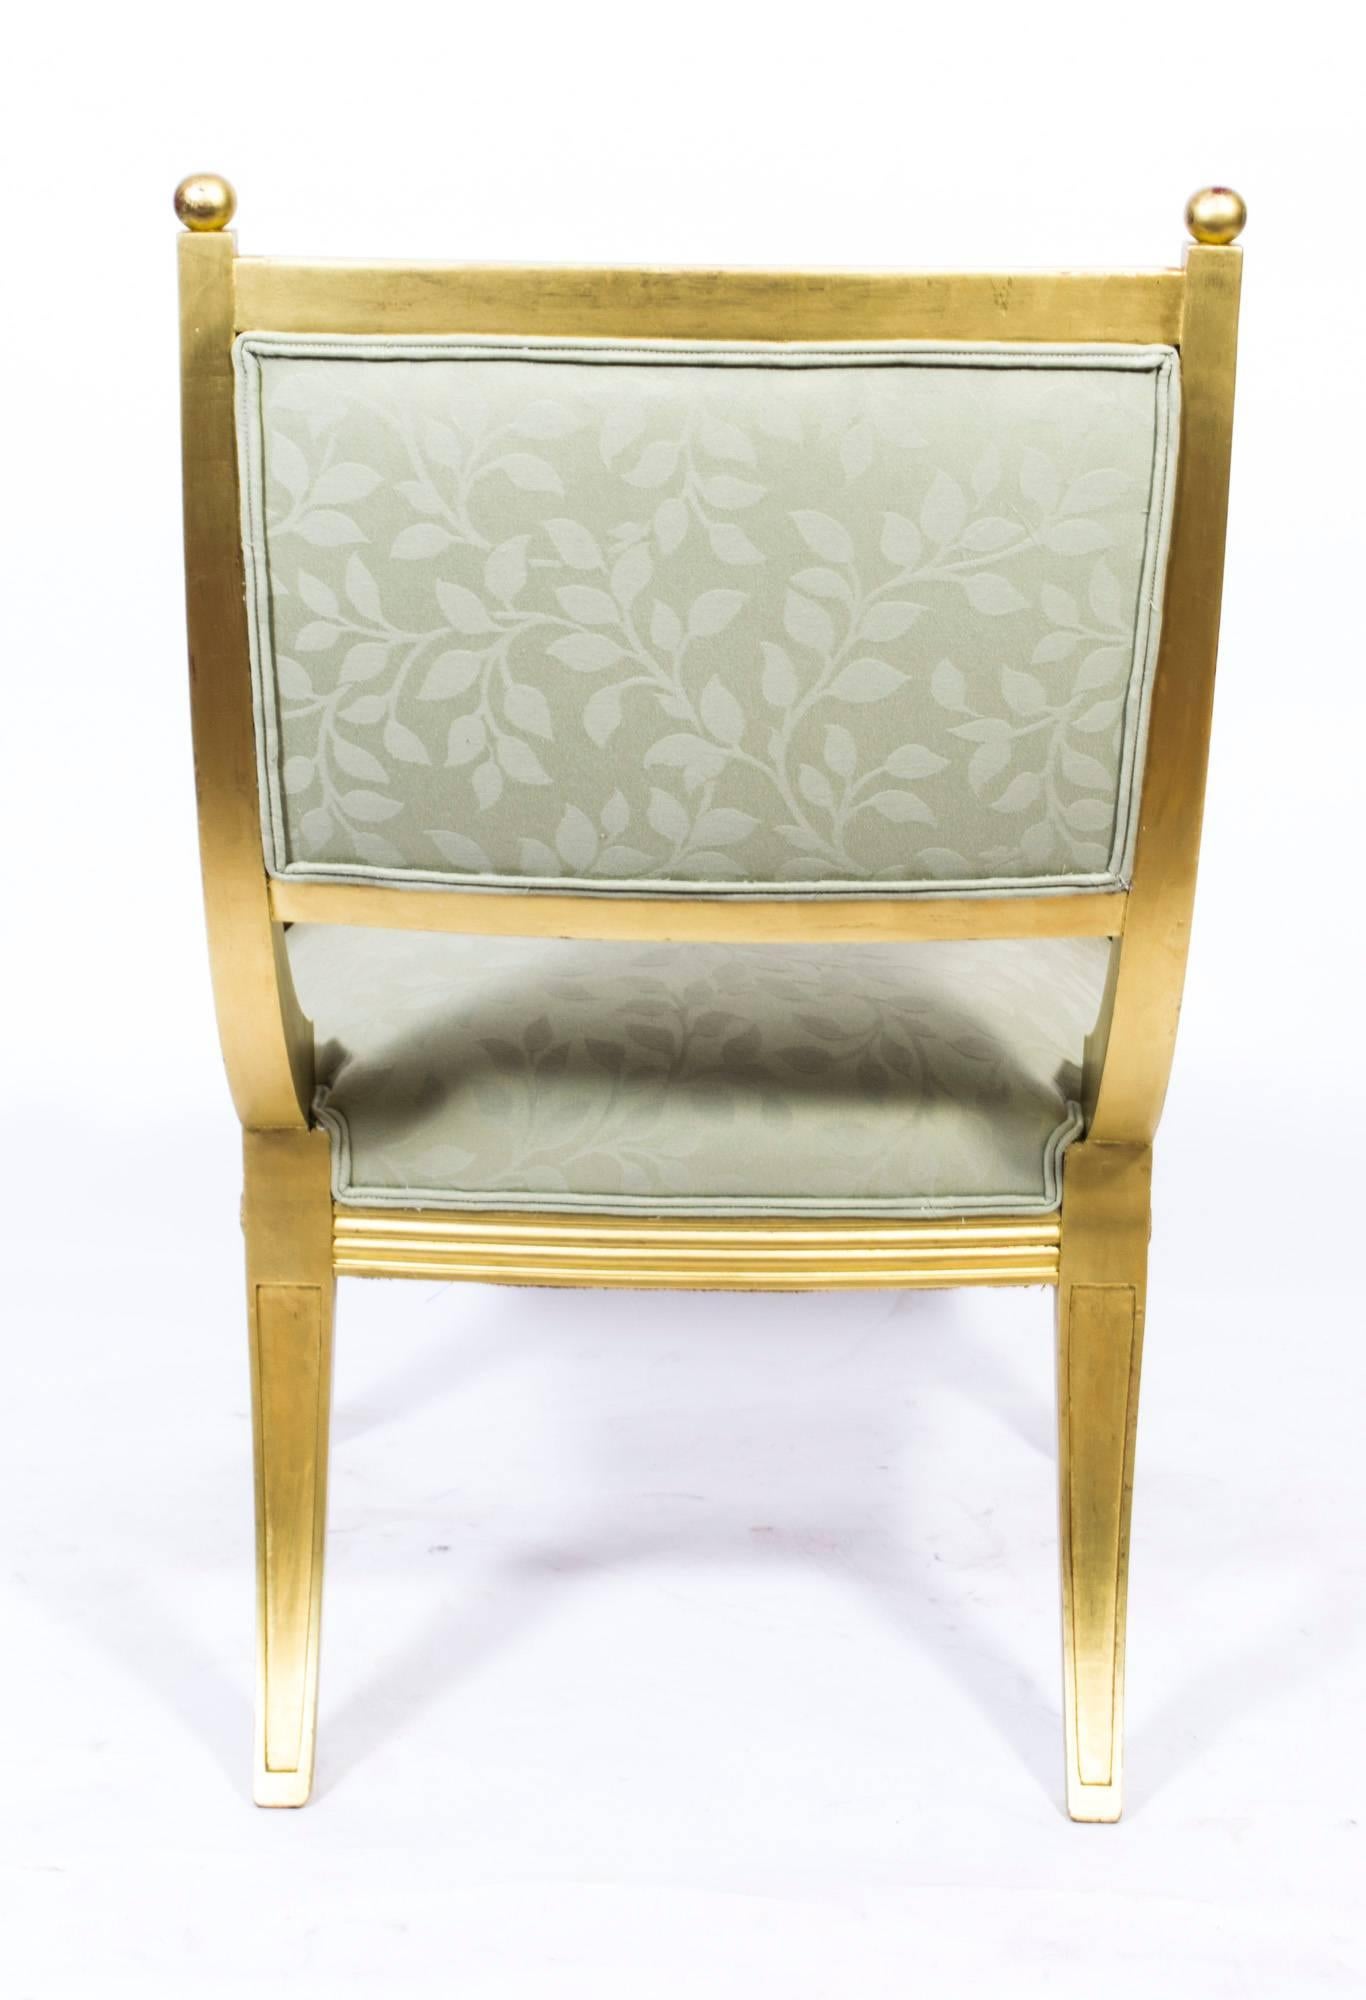 Early 20th Century Regency Style Giltwood Armchair For Sale 2